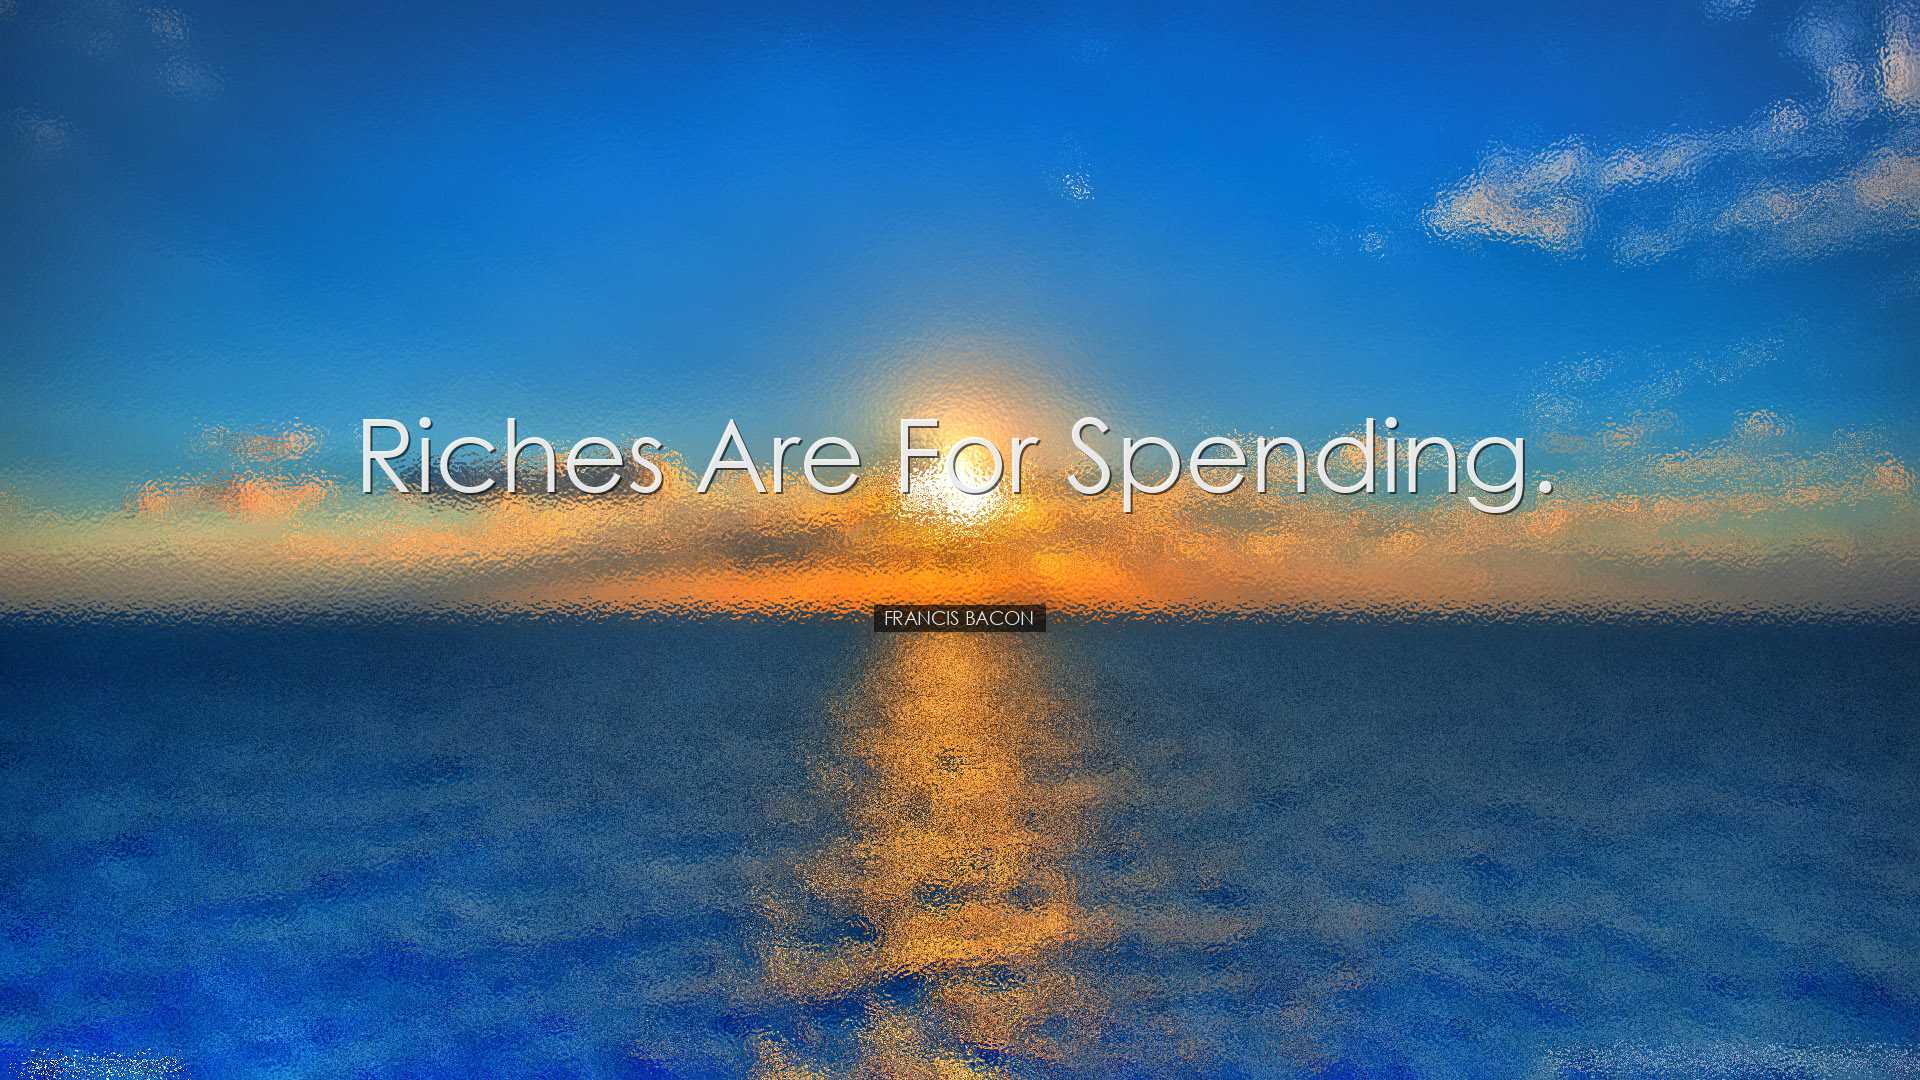 Riches are for spending. - Francis Bacon